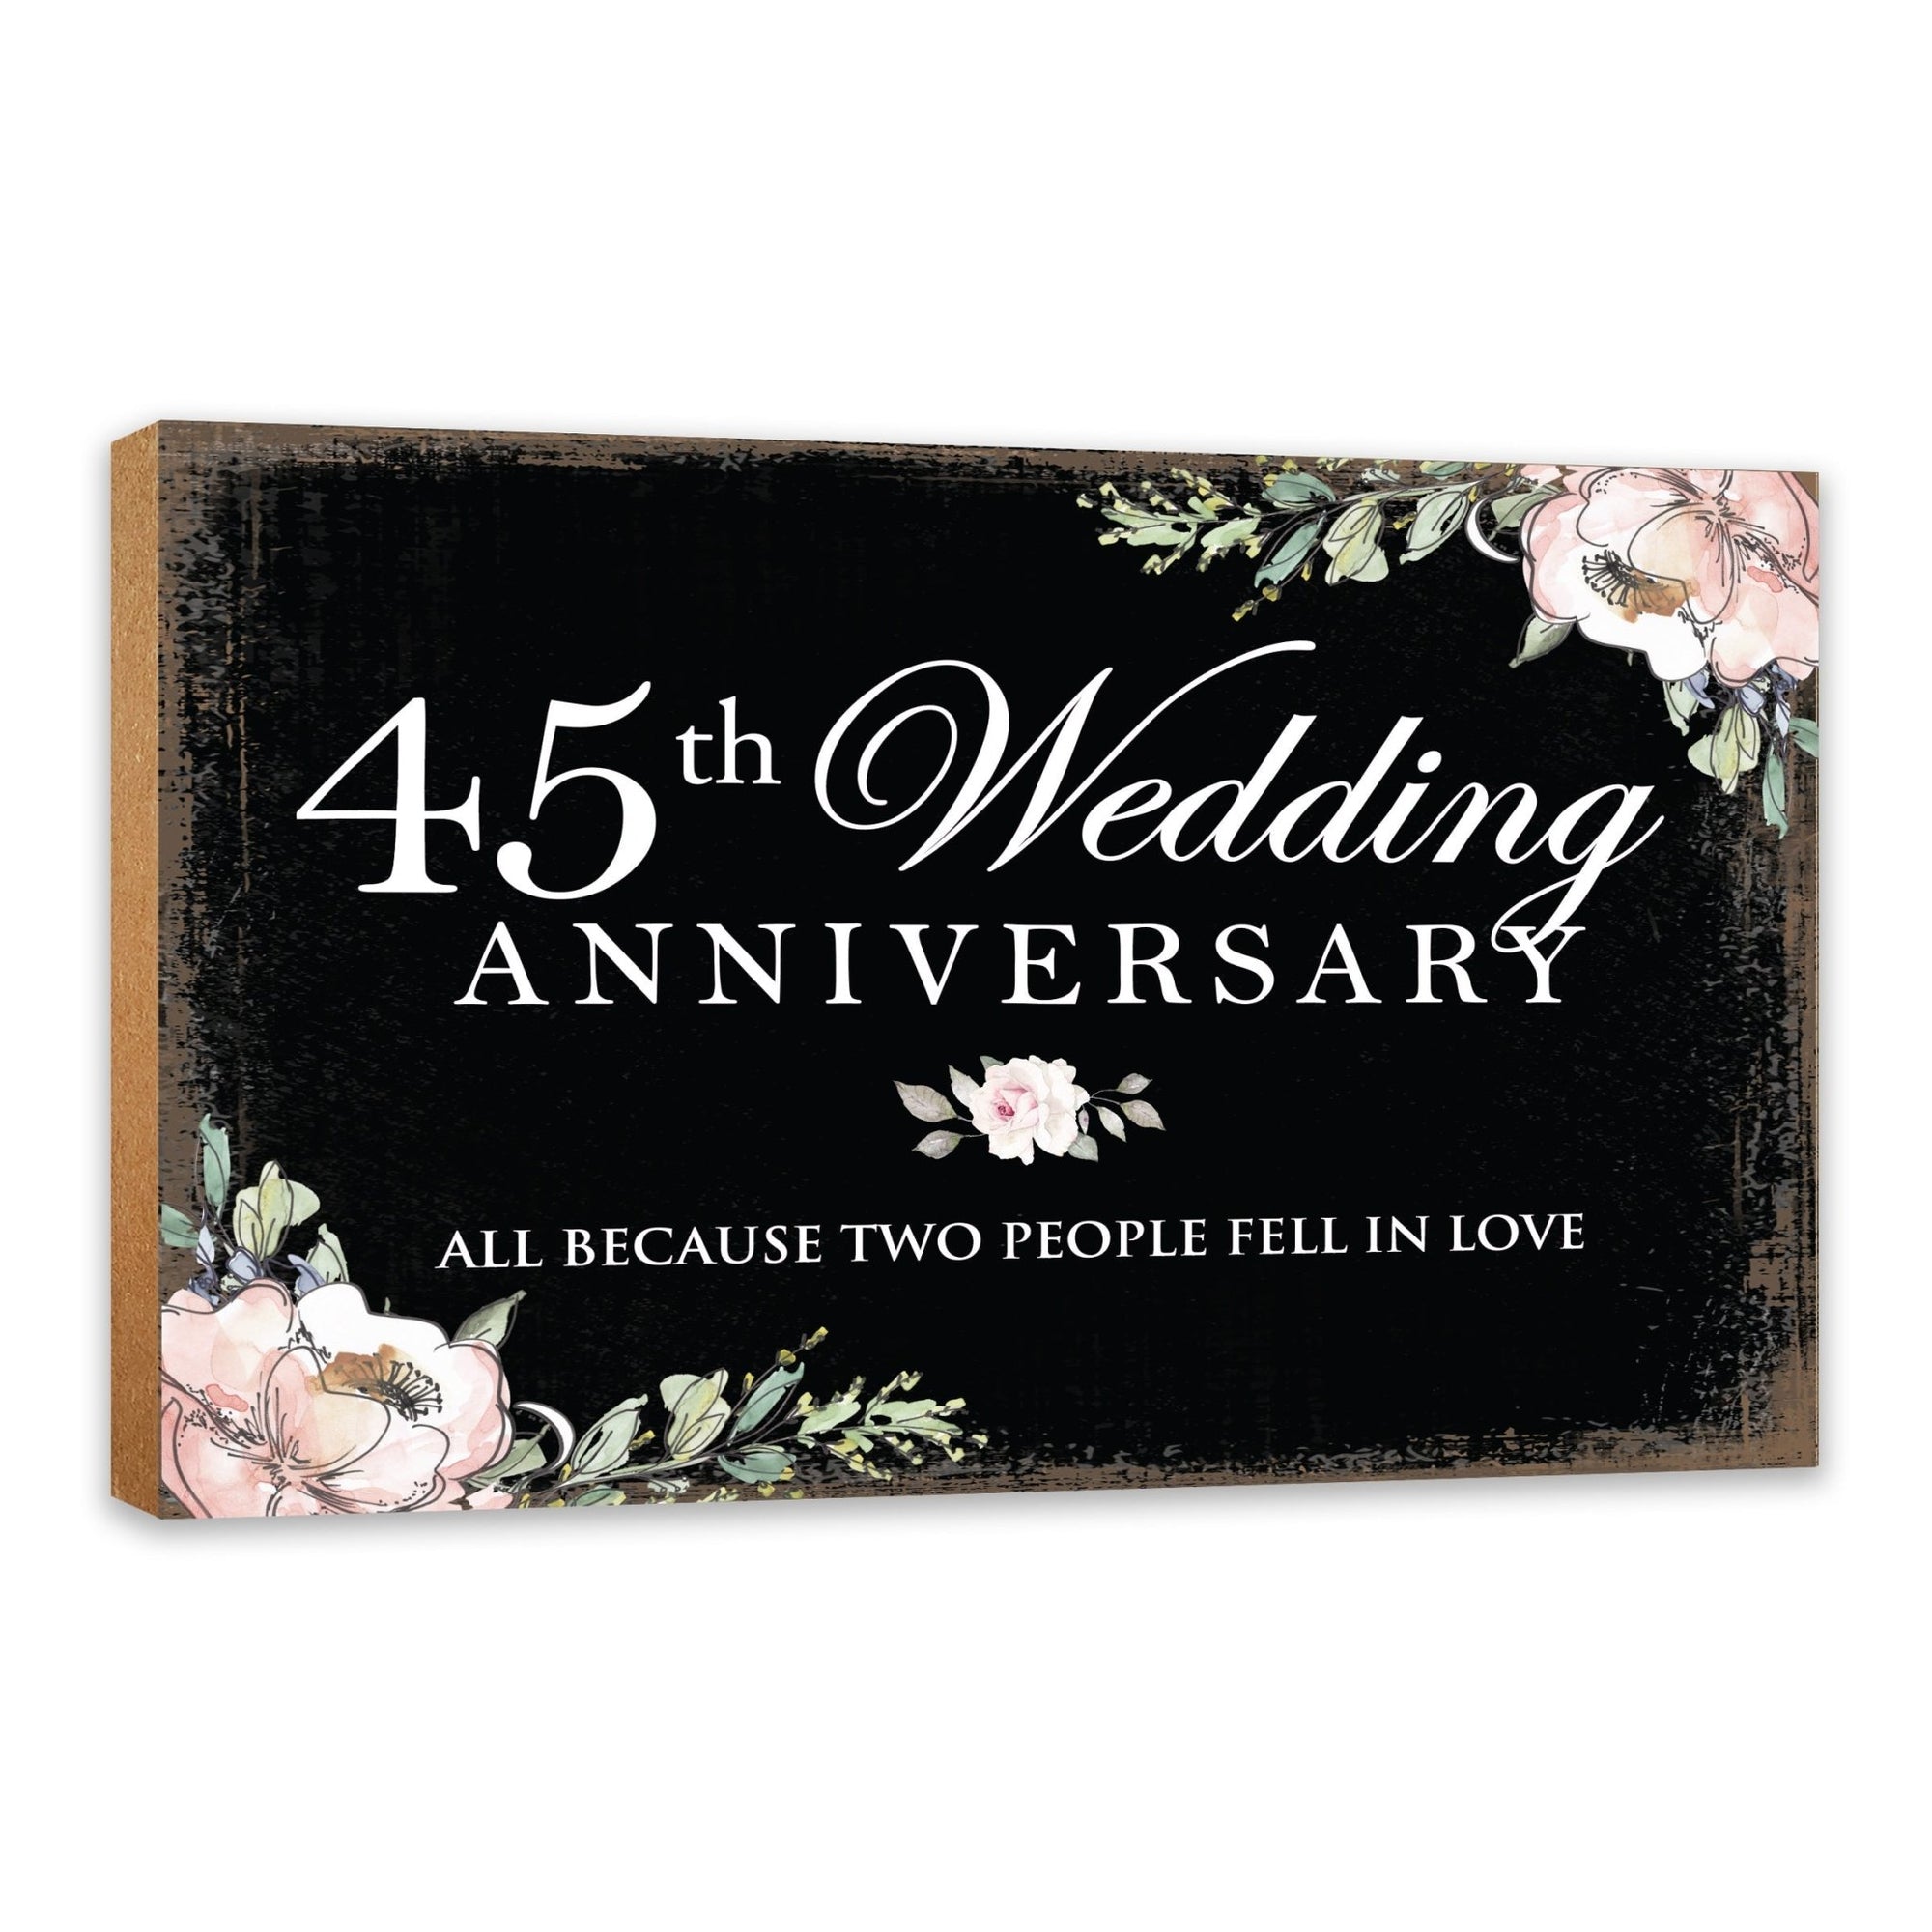 45th Wedding Anniversary Unique Shelf Decor and Tabletop Signs Gift for Couples - Fell In Love - LifeSong Milestones